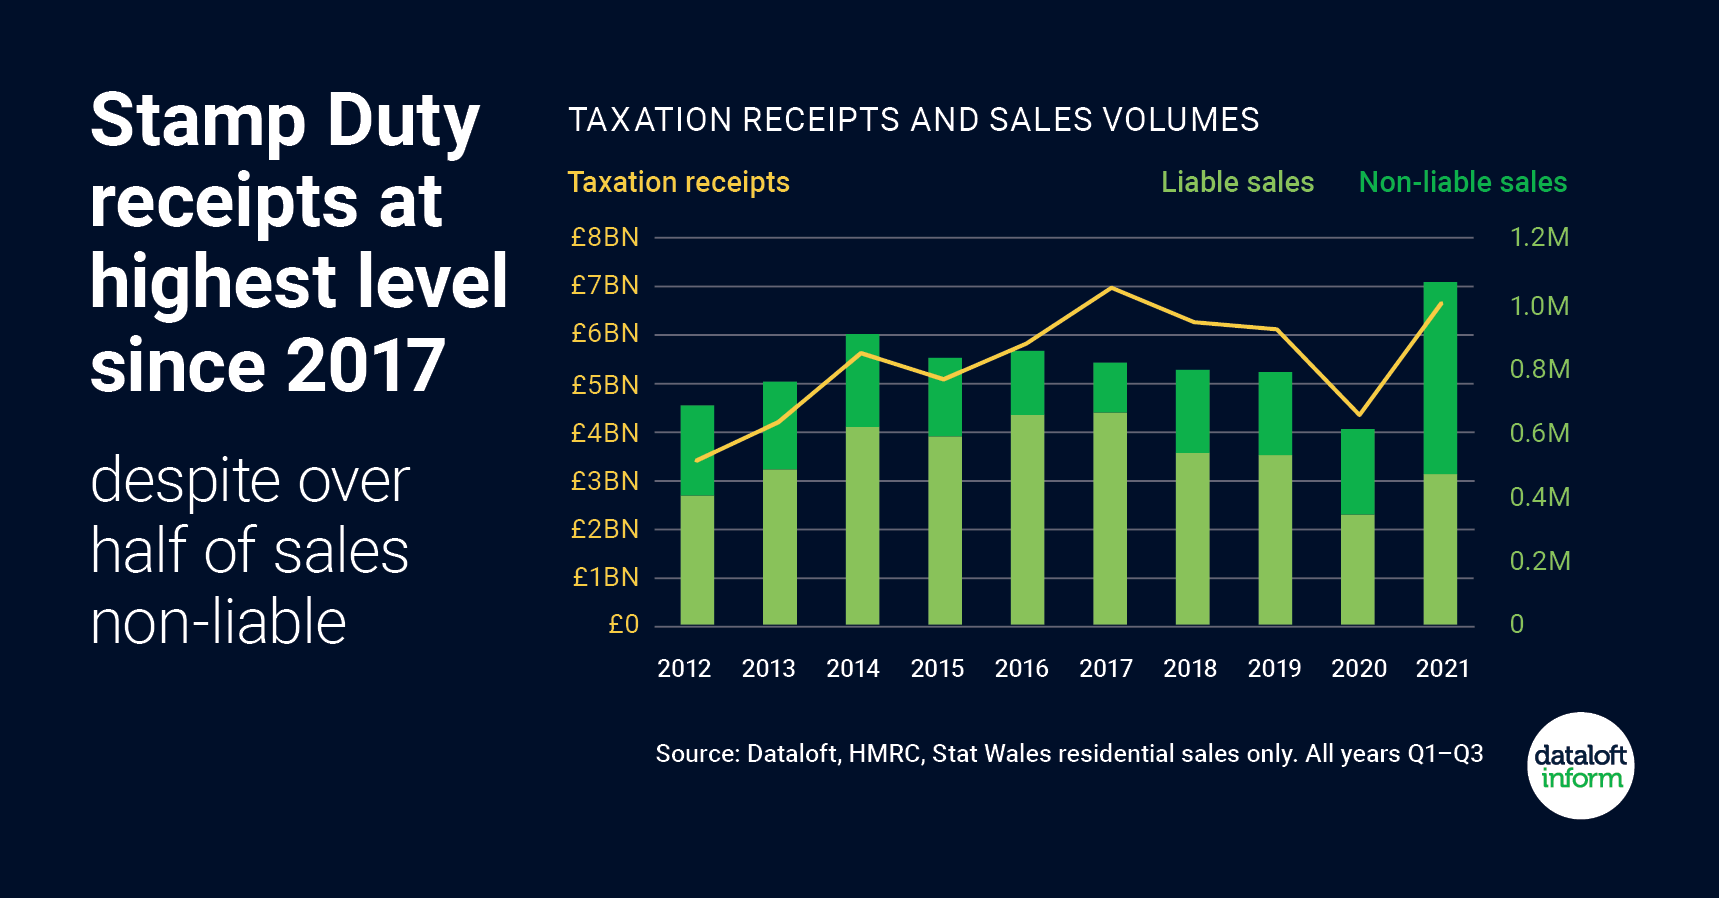 Stamp Duty receipts at highest level since 2017